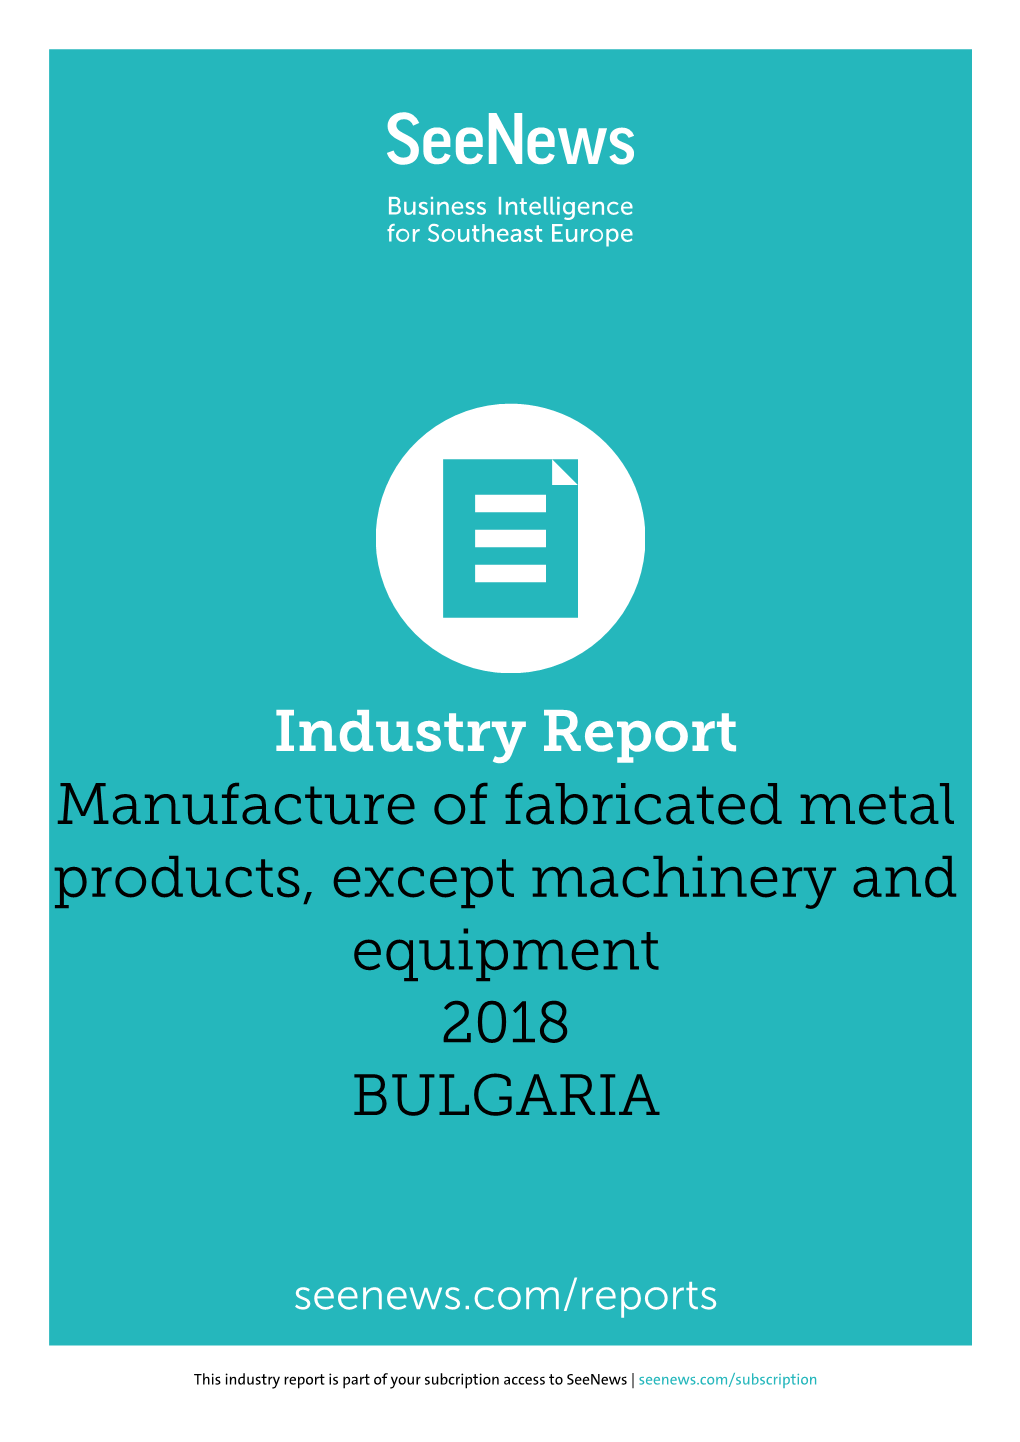 Industry Report Manufacture of Fabricated Metal Products, Except Machinery and Equipment 2018 BULGARIA